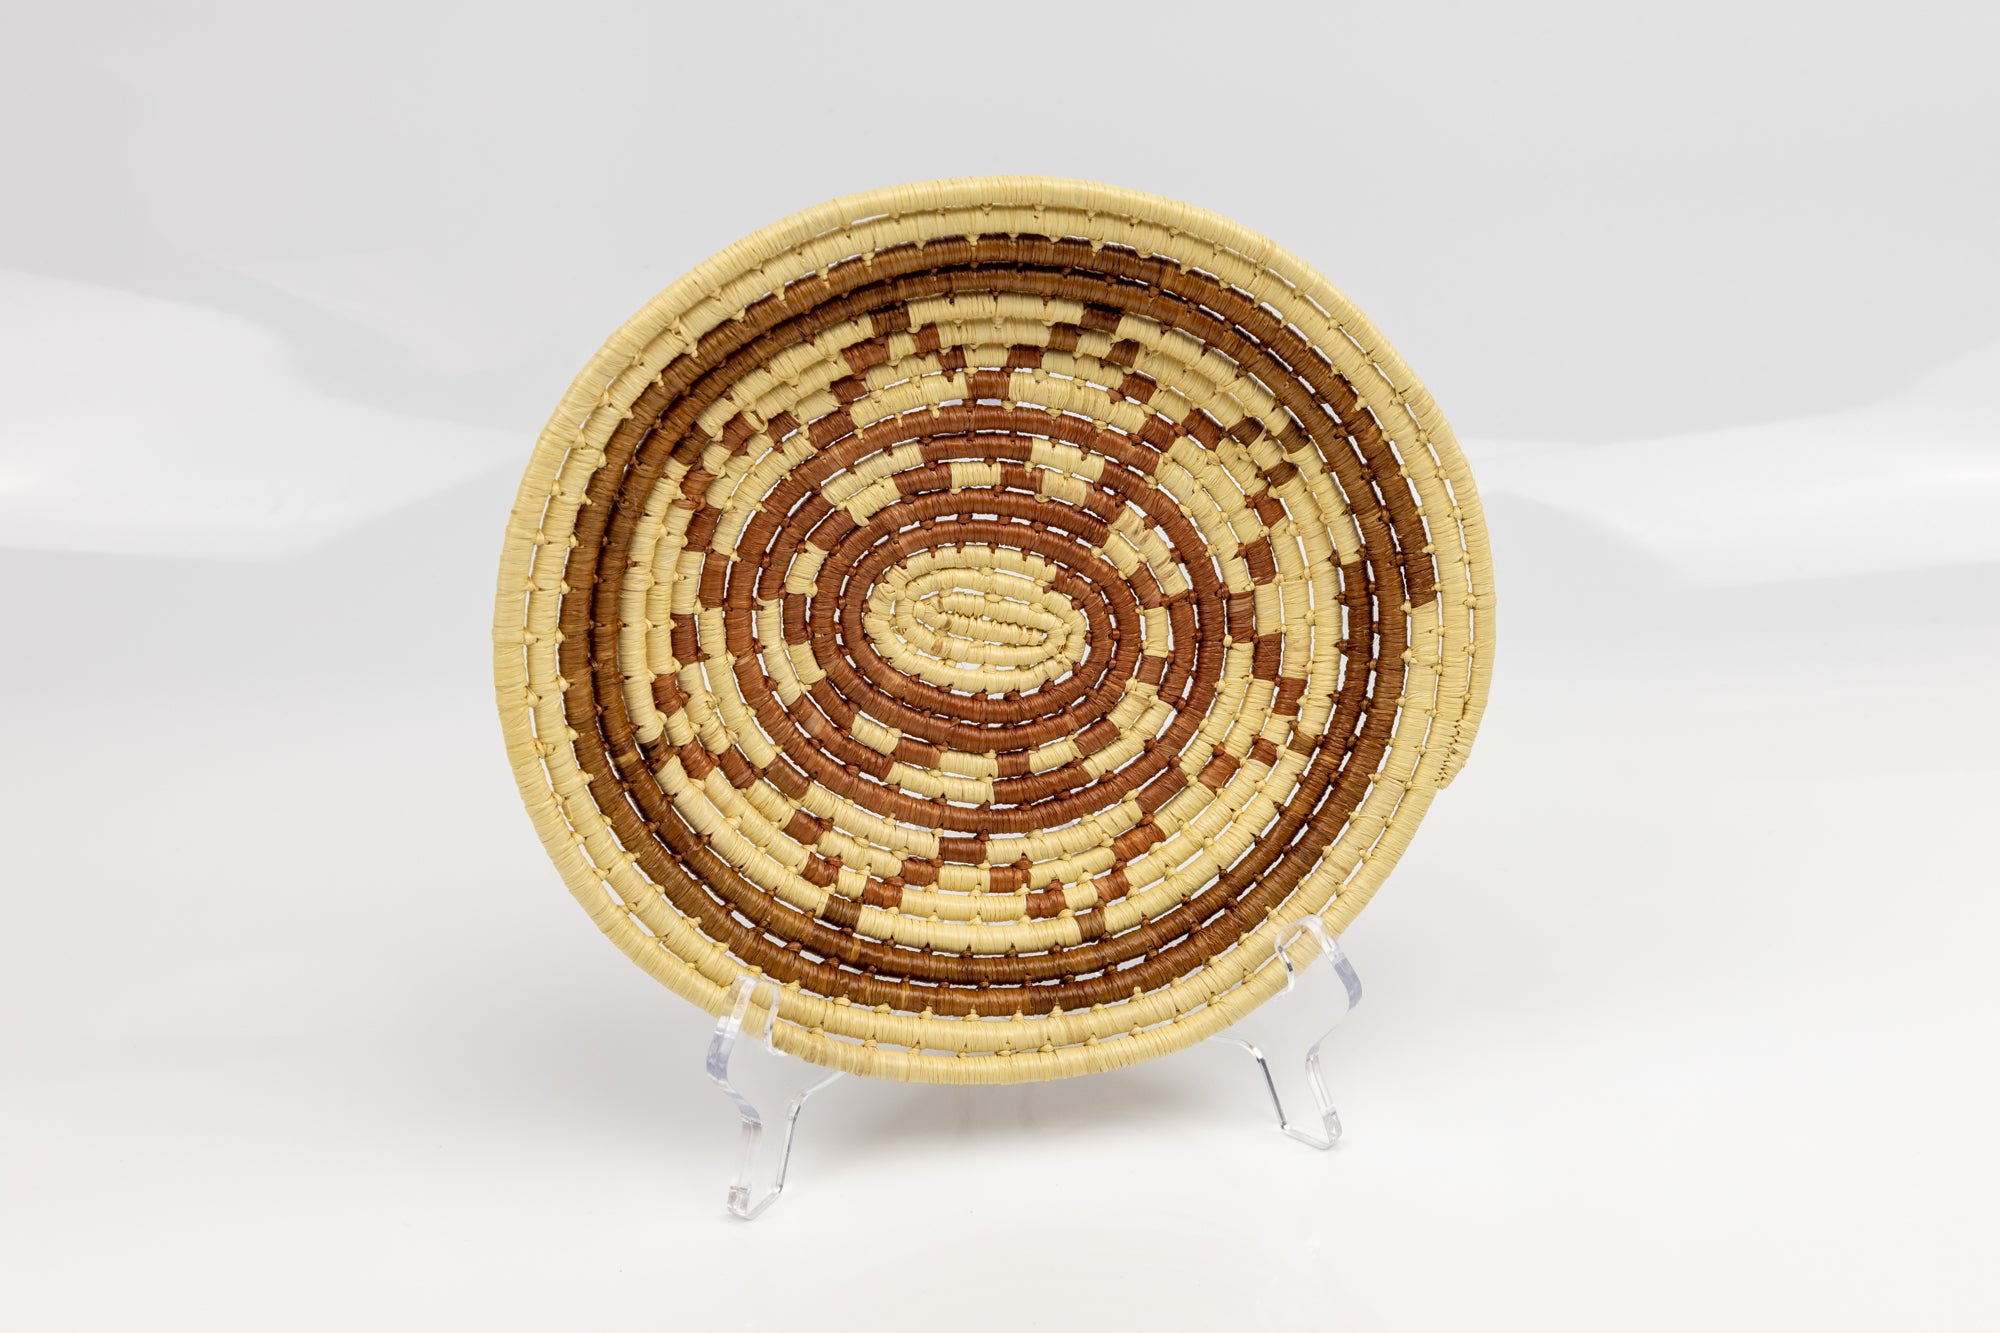 Hand woven  plate basket from Panama. Brown and white colors. Wall decoration. Indigenous artists Panama.